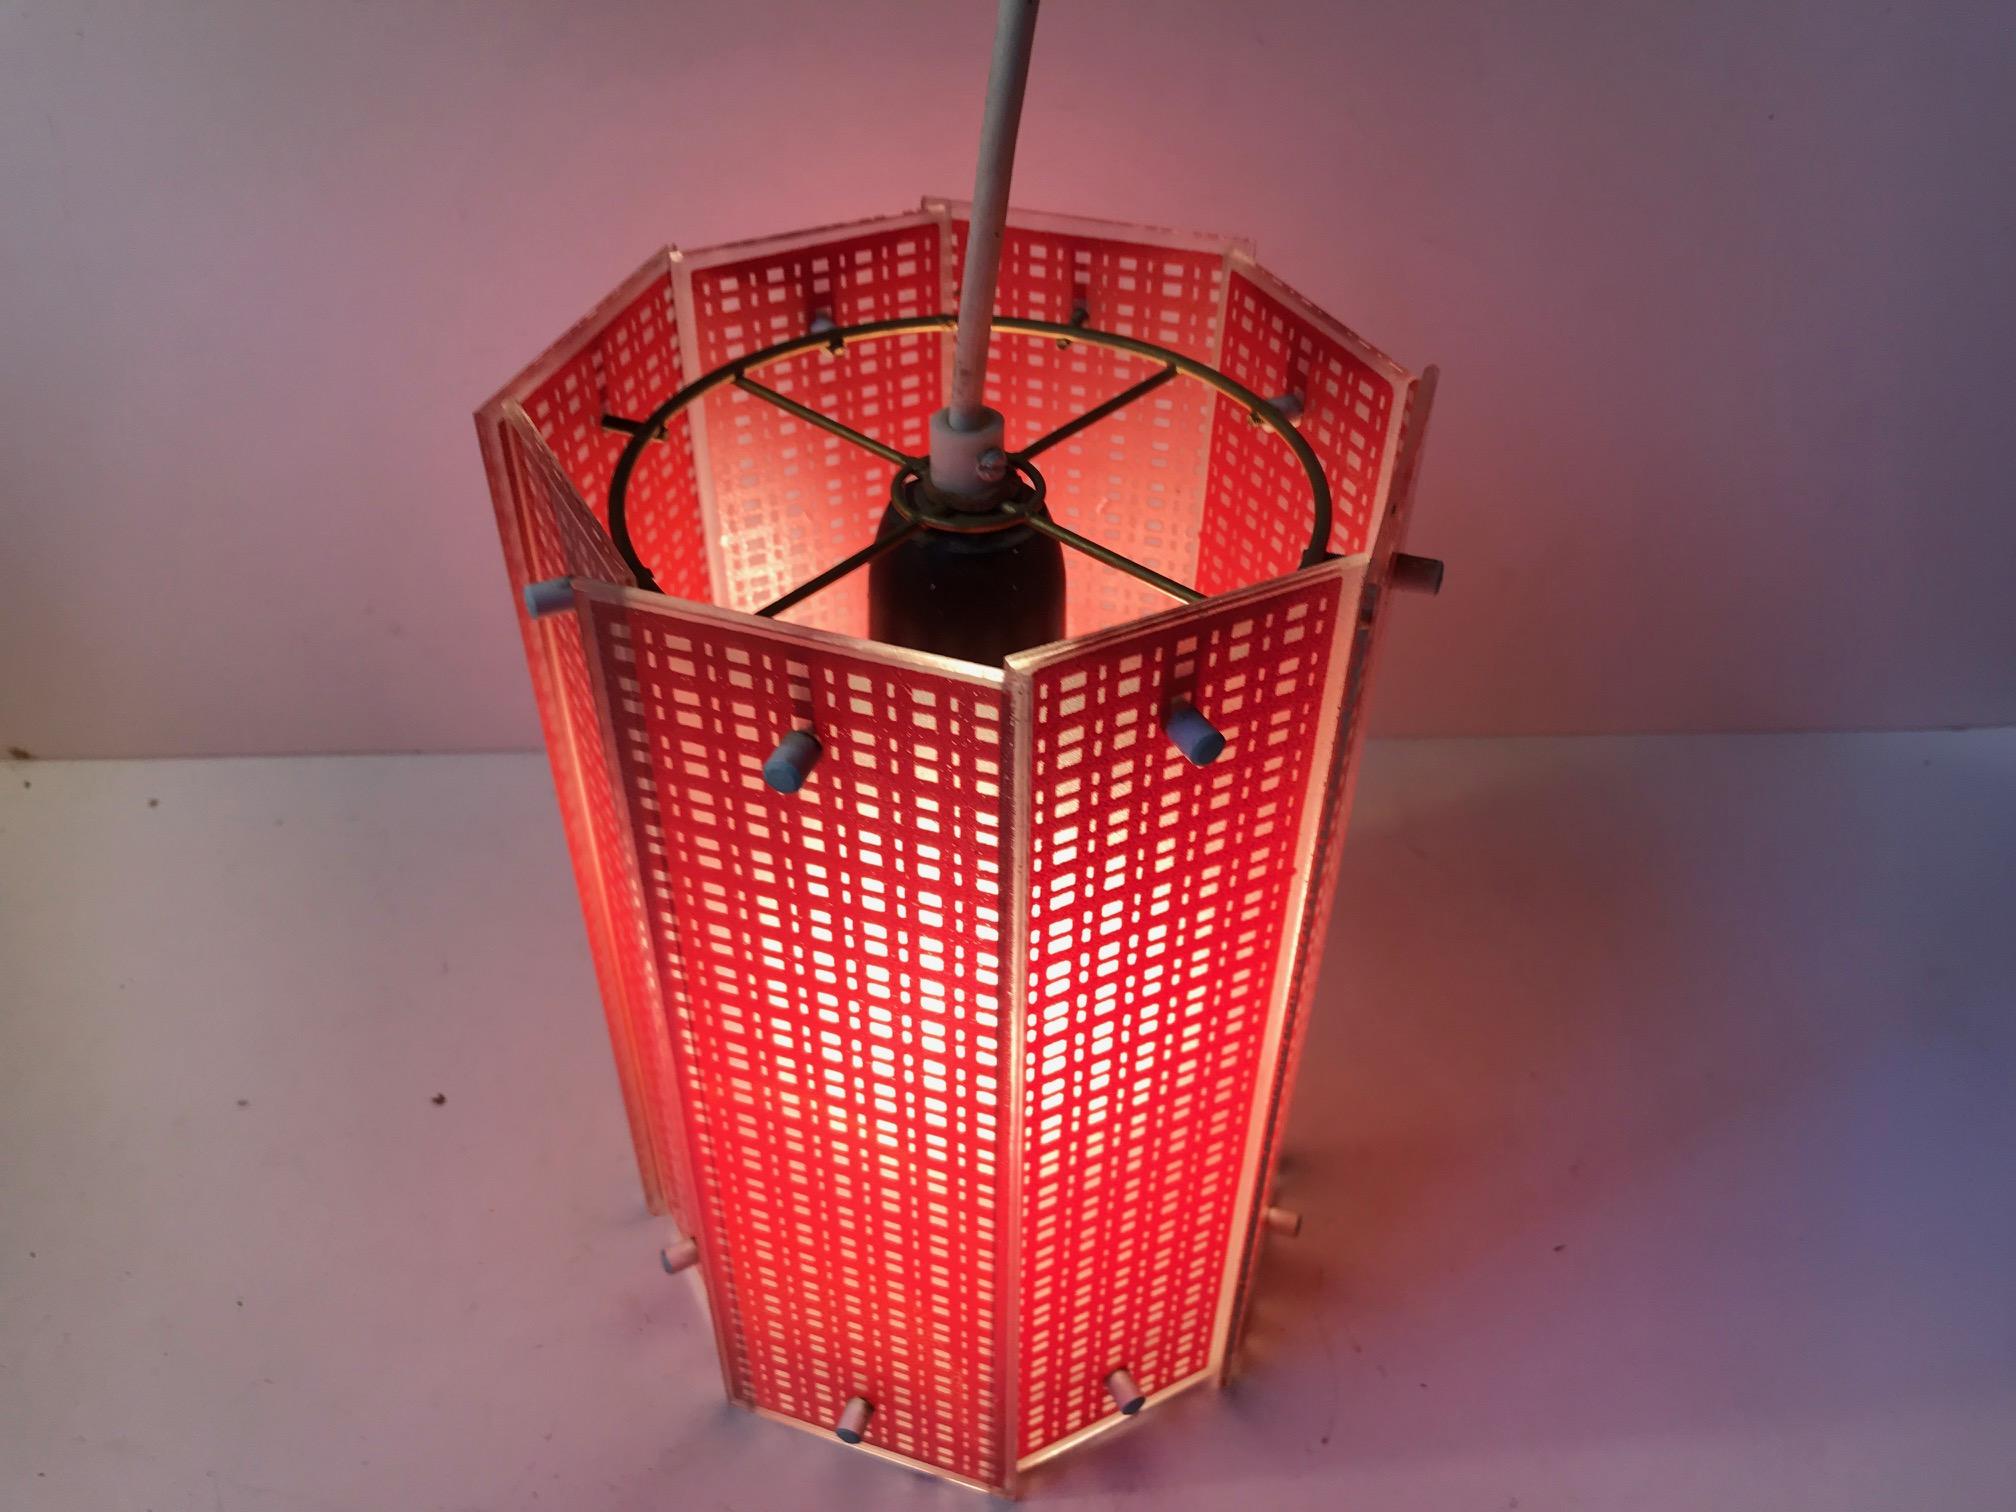 Octagonal Scandinavian Modern Pendant Light in Red Checkered Glass, 1960s In Good Condition For Sale In Esbjerg, DK